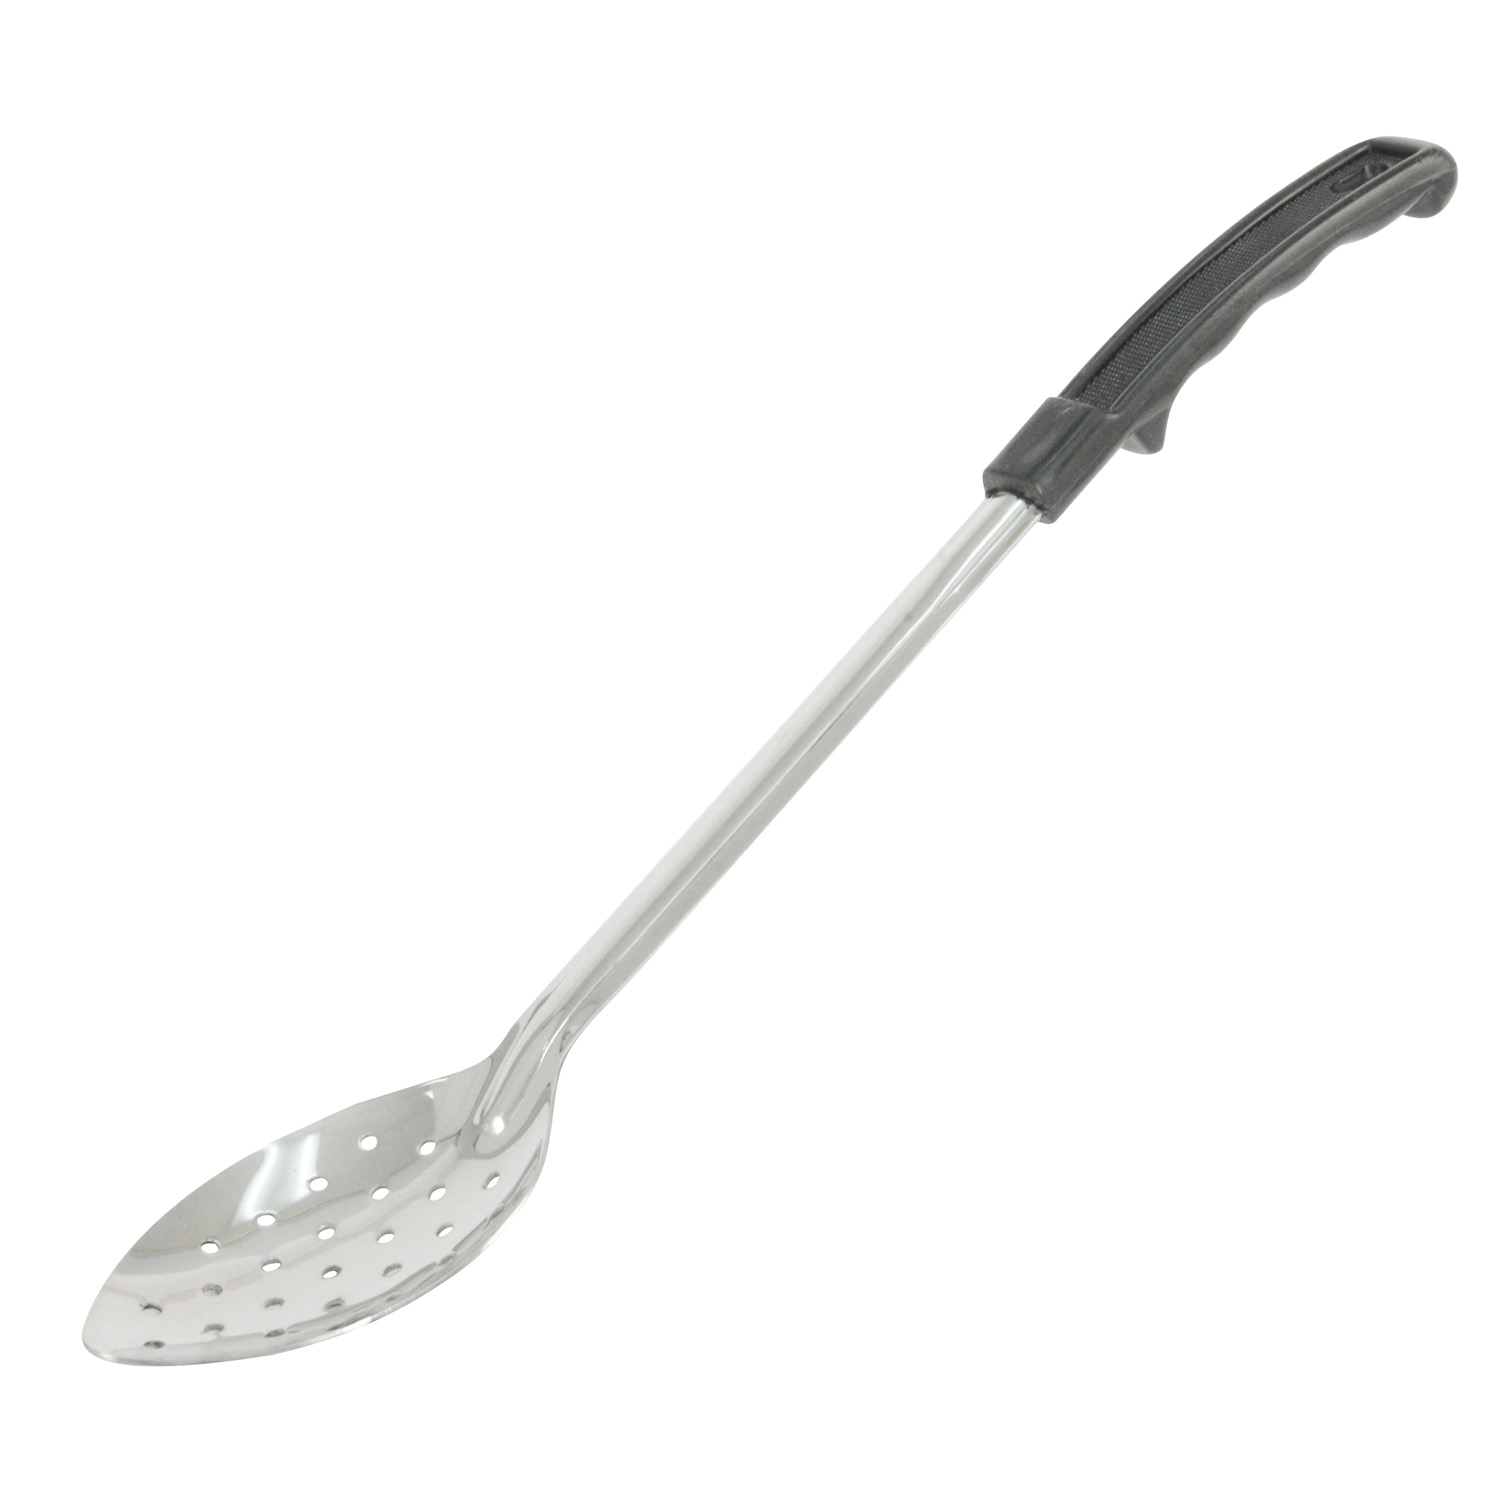 CAC China SBSP-11BH Perforated Stainless Steel Basting Spoon 1.2mm with Black Handle 11"